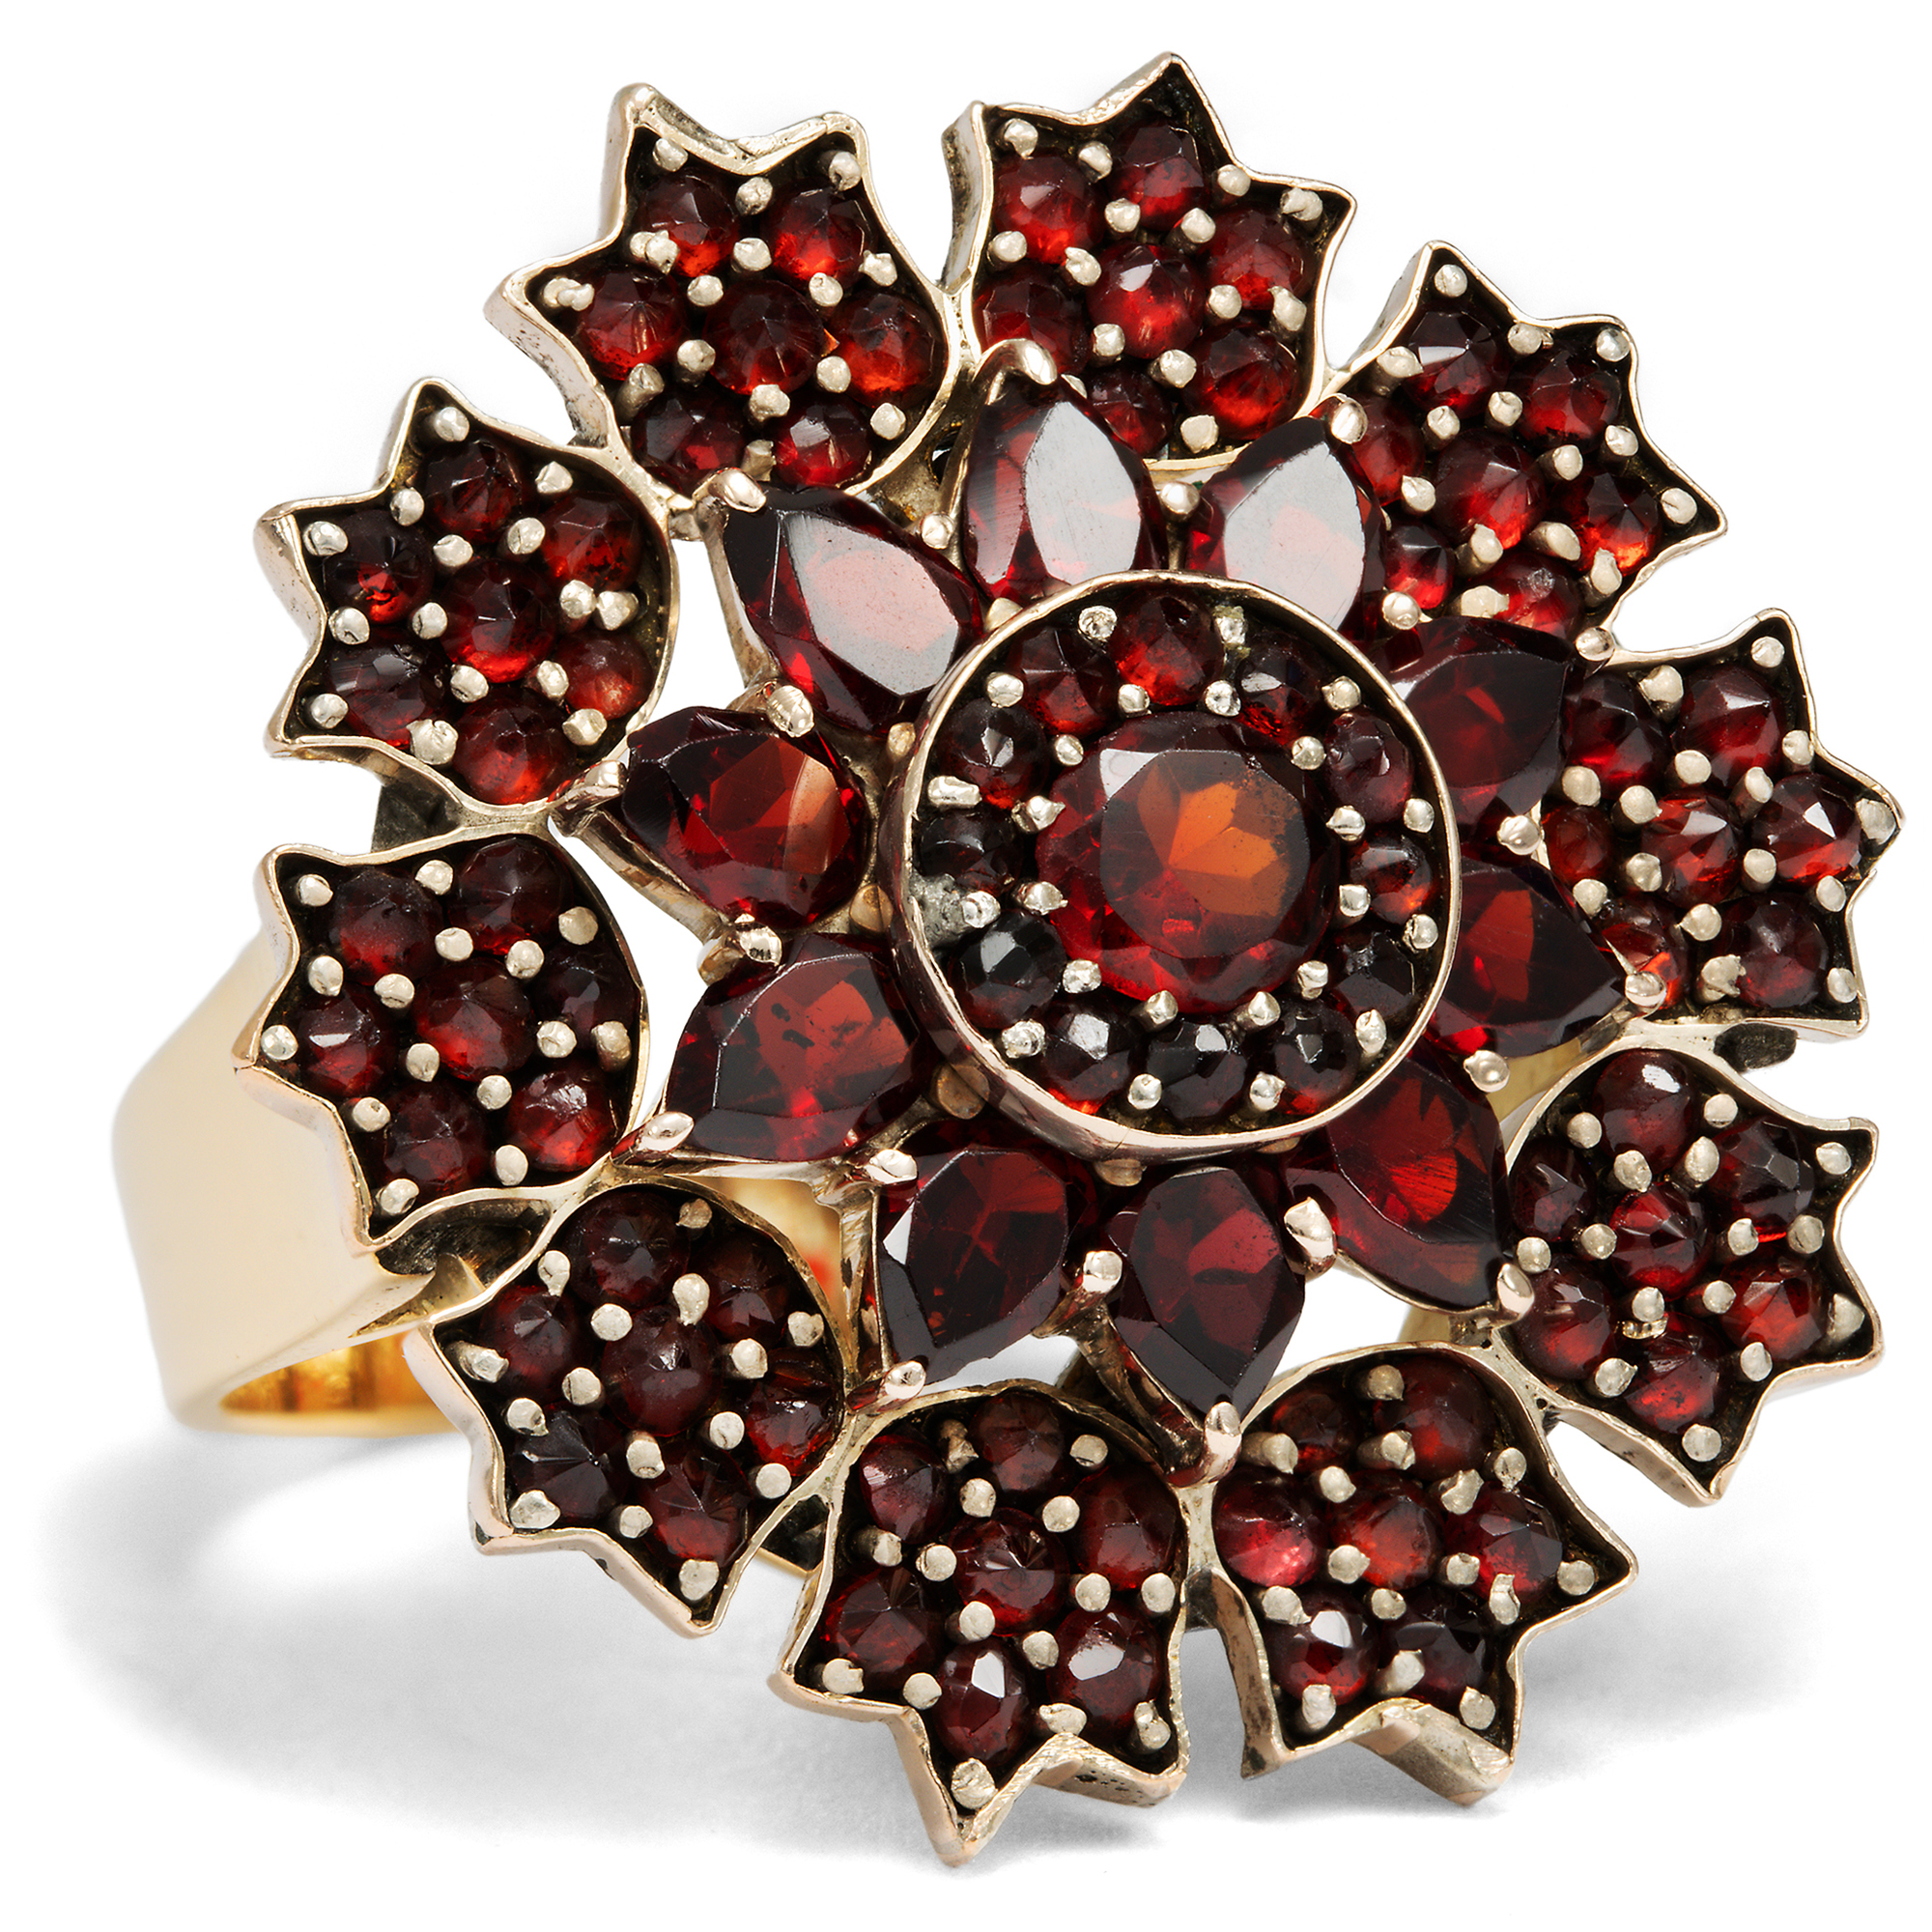 Large Vintage Ring Made From an Old Garnet Flower & Gold, Circa 1890 / Circa 1975